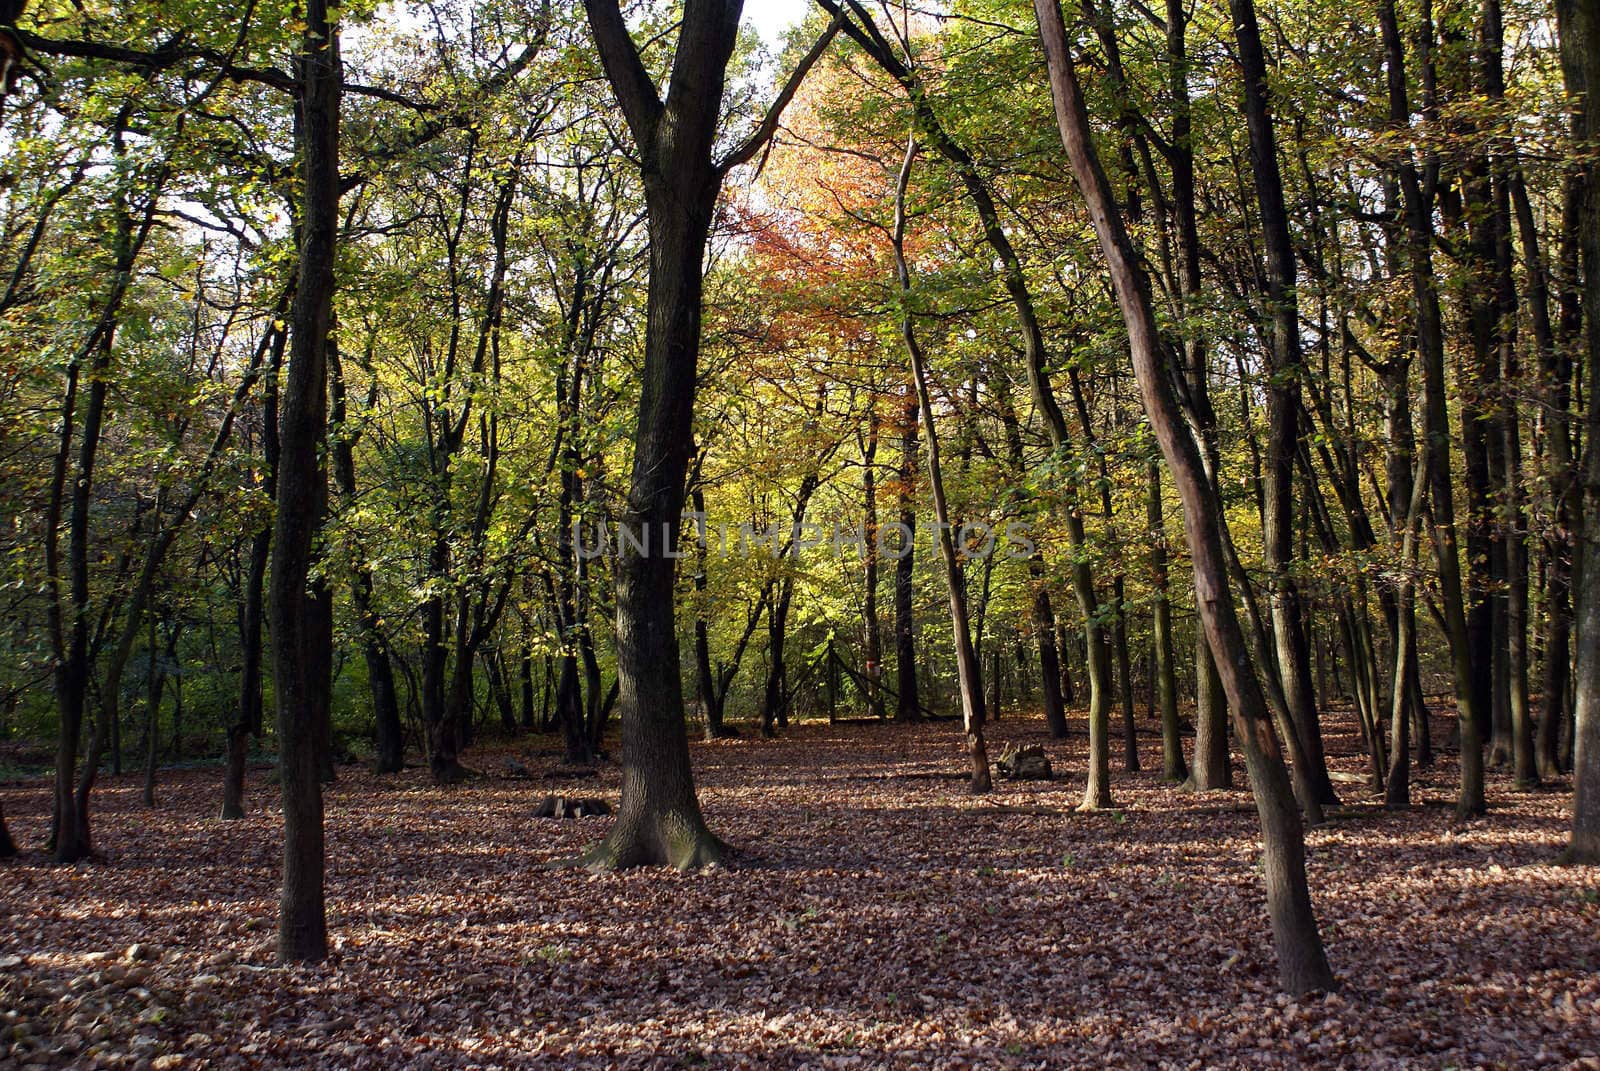 A peaceful forest on a beautiful day in autumn.